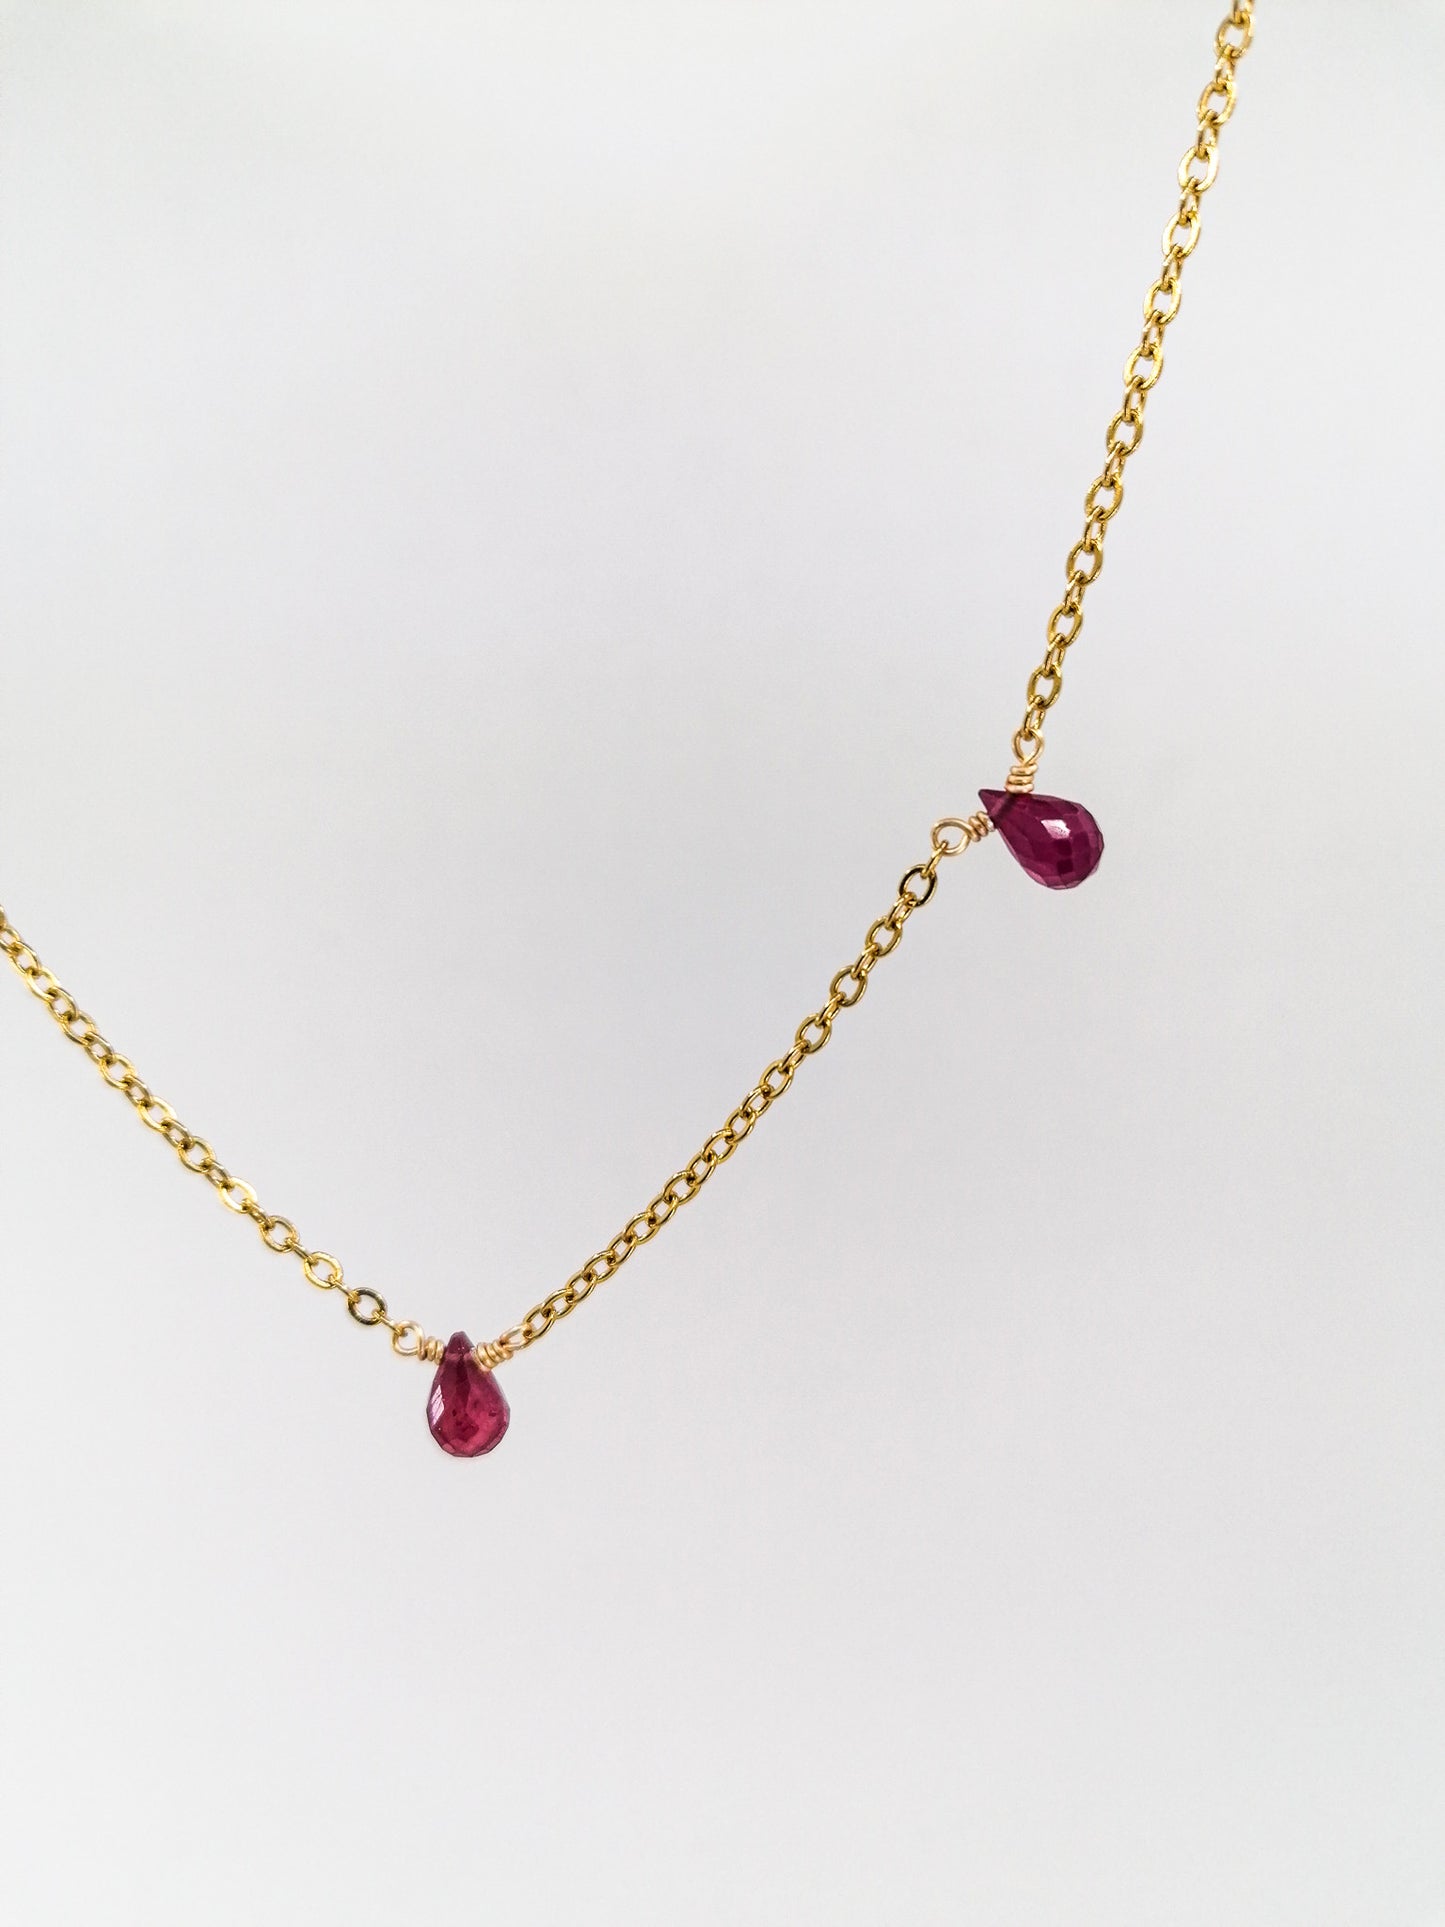 Ruby briolette necklace